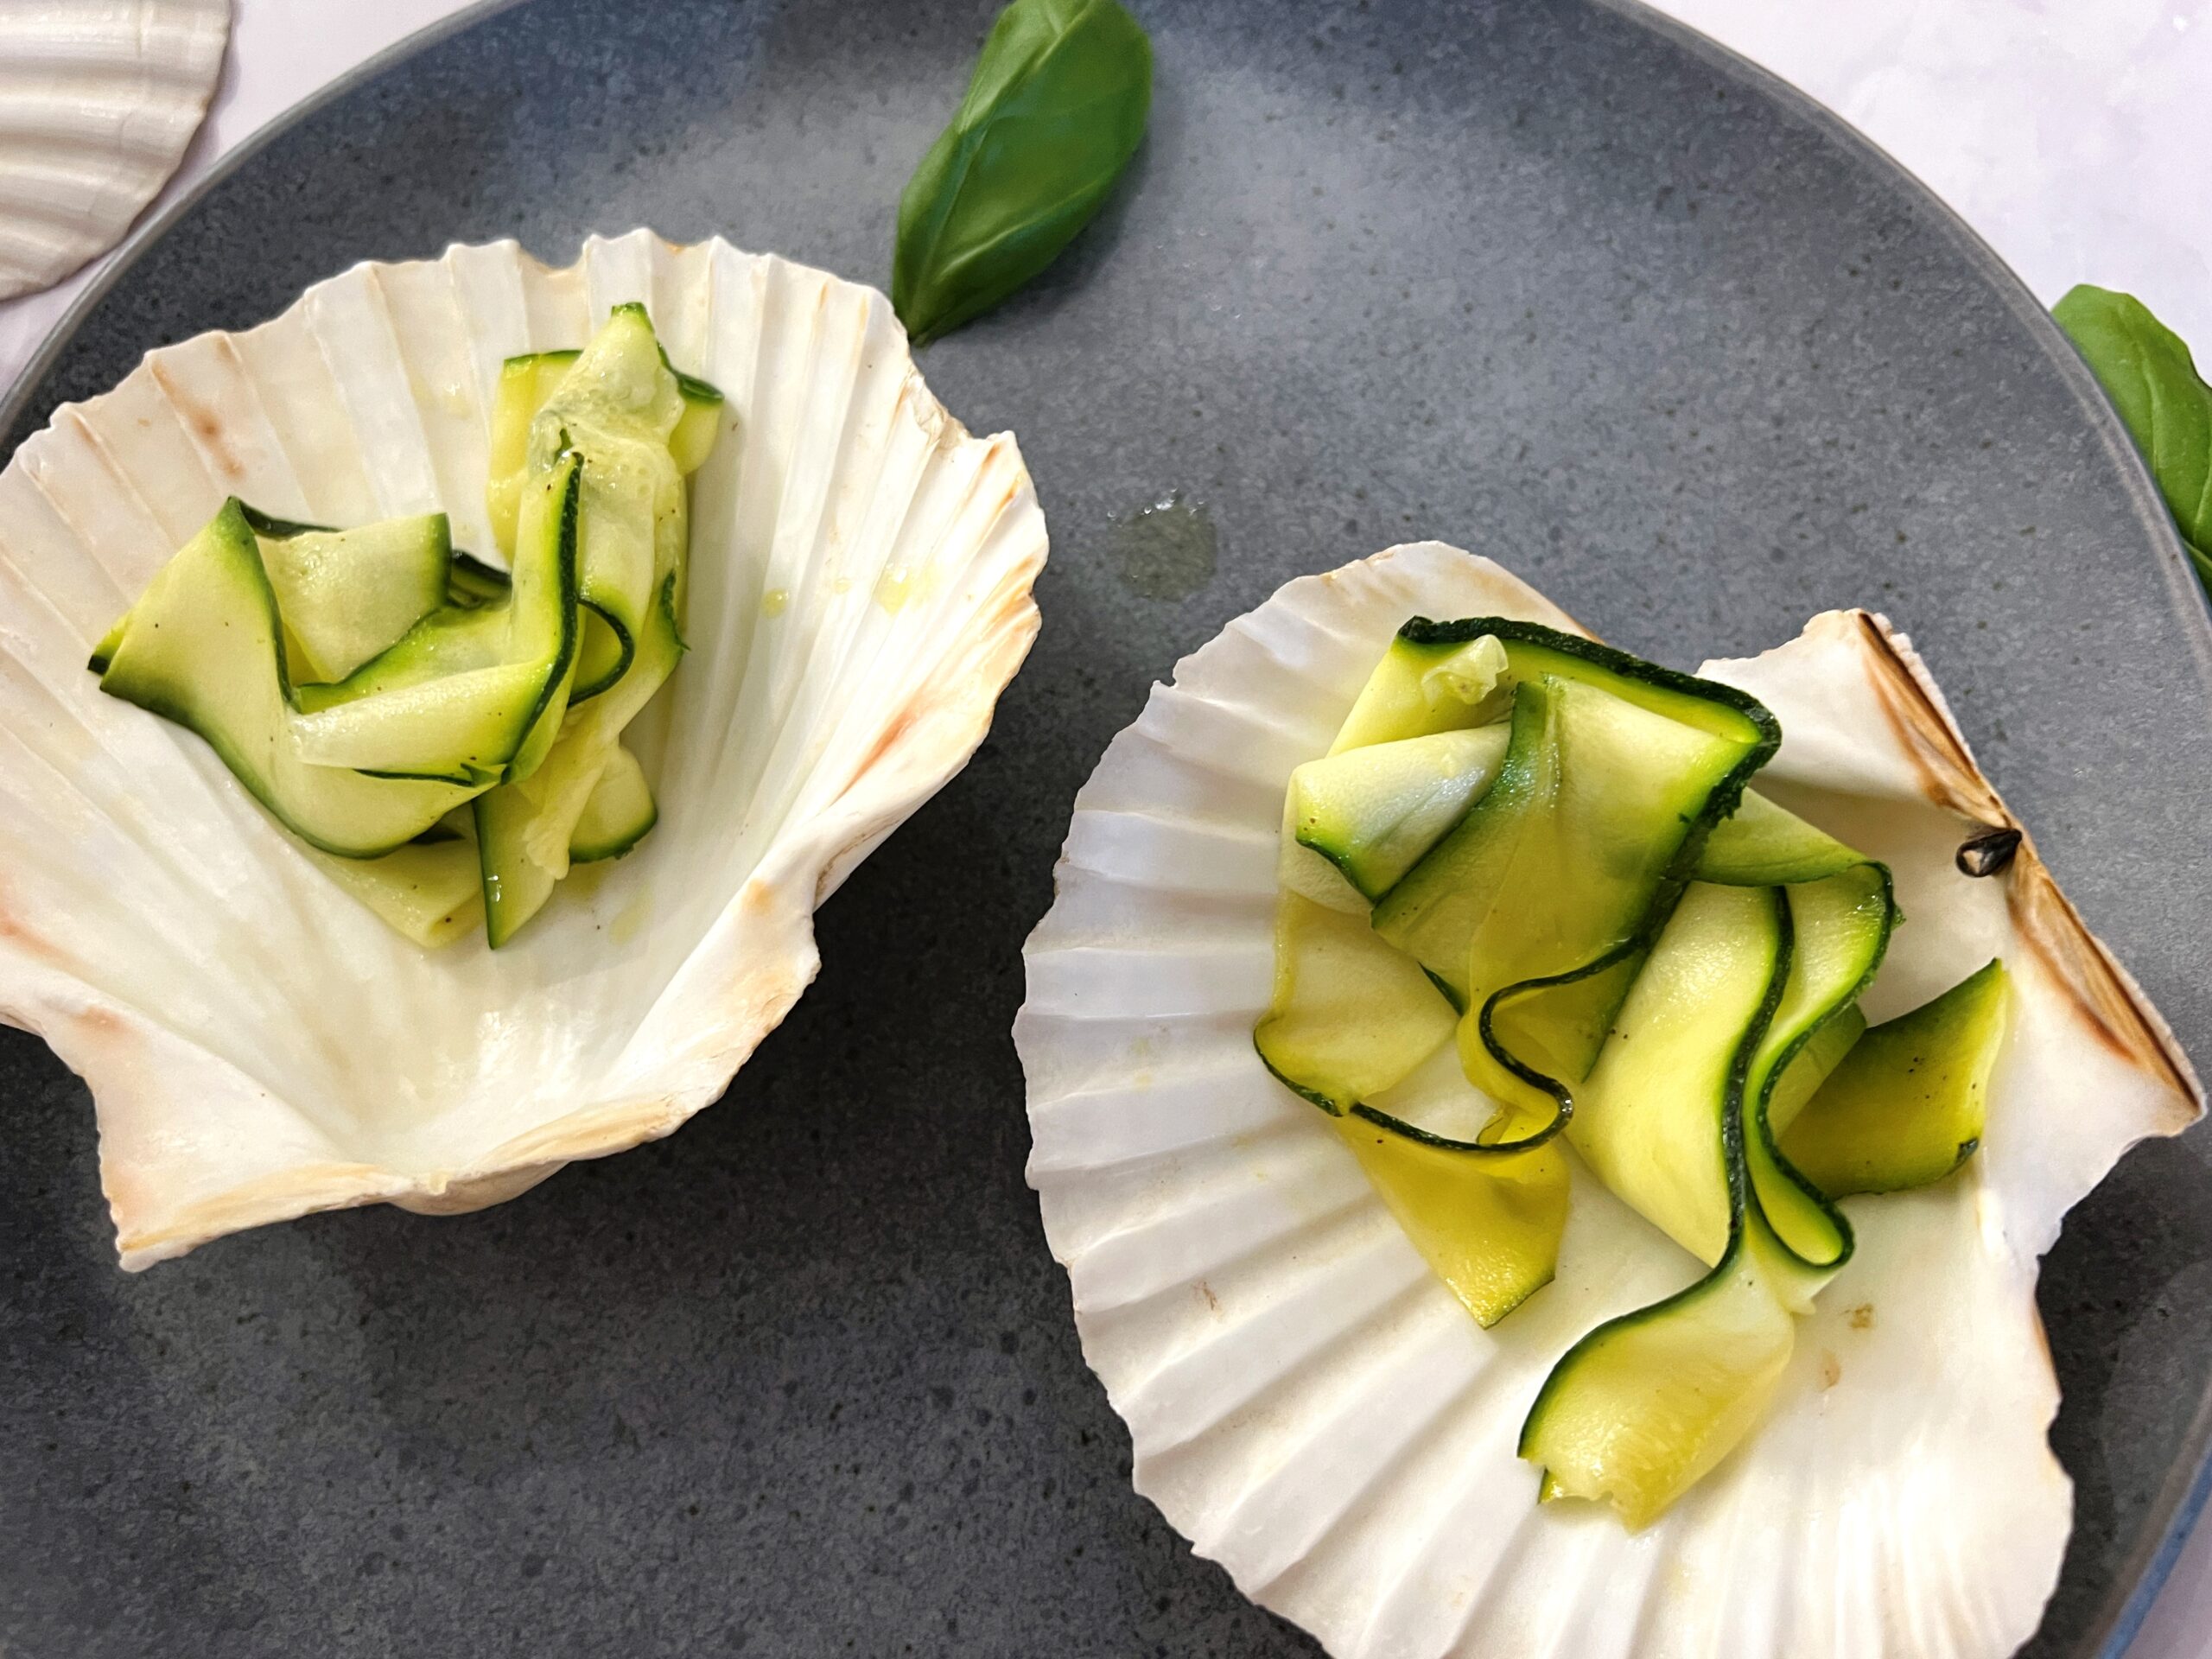 Seared Basil Scallops with Courgette Ribbons Recipe